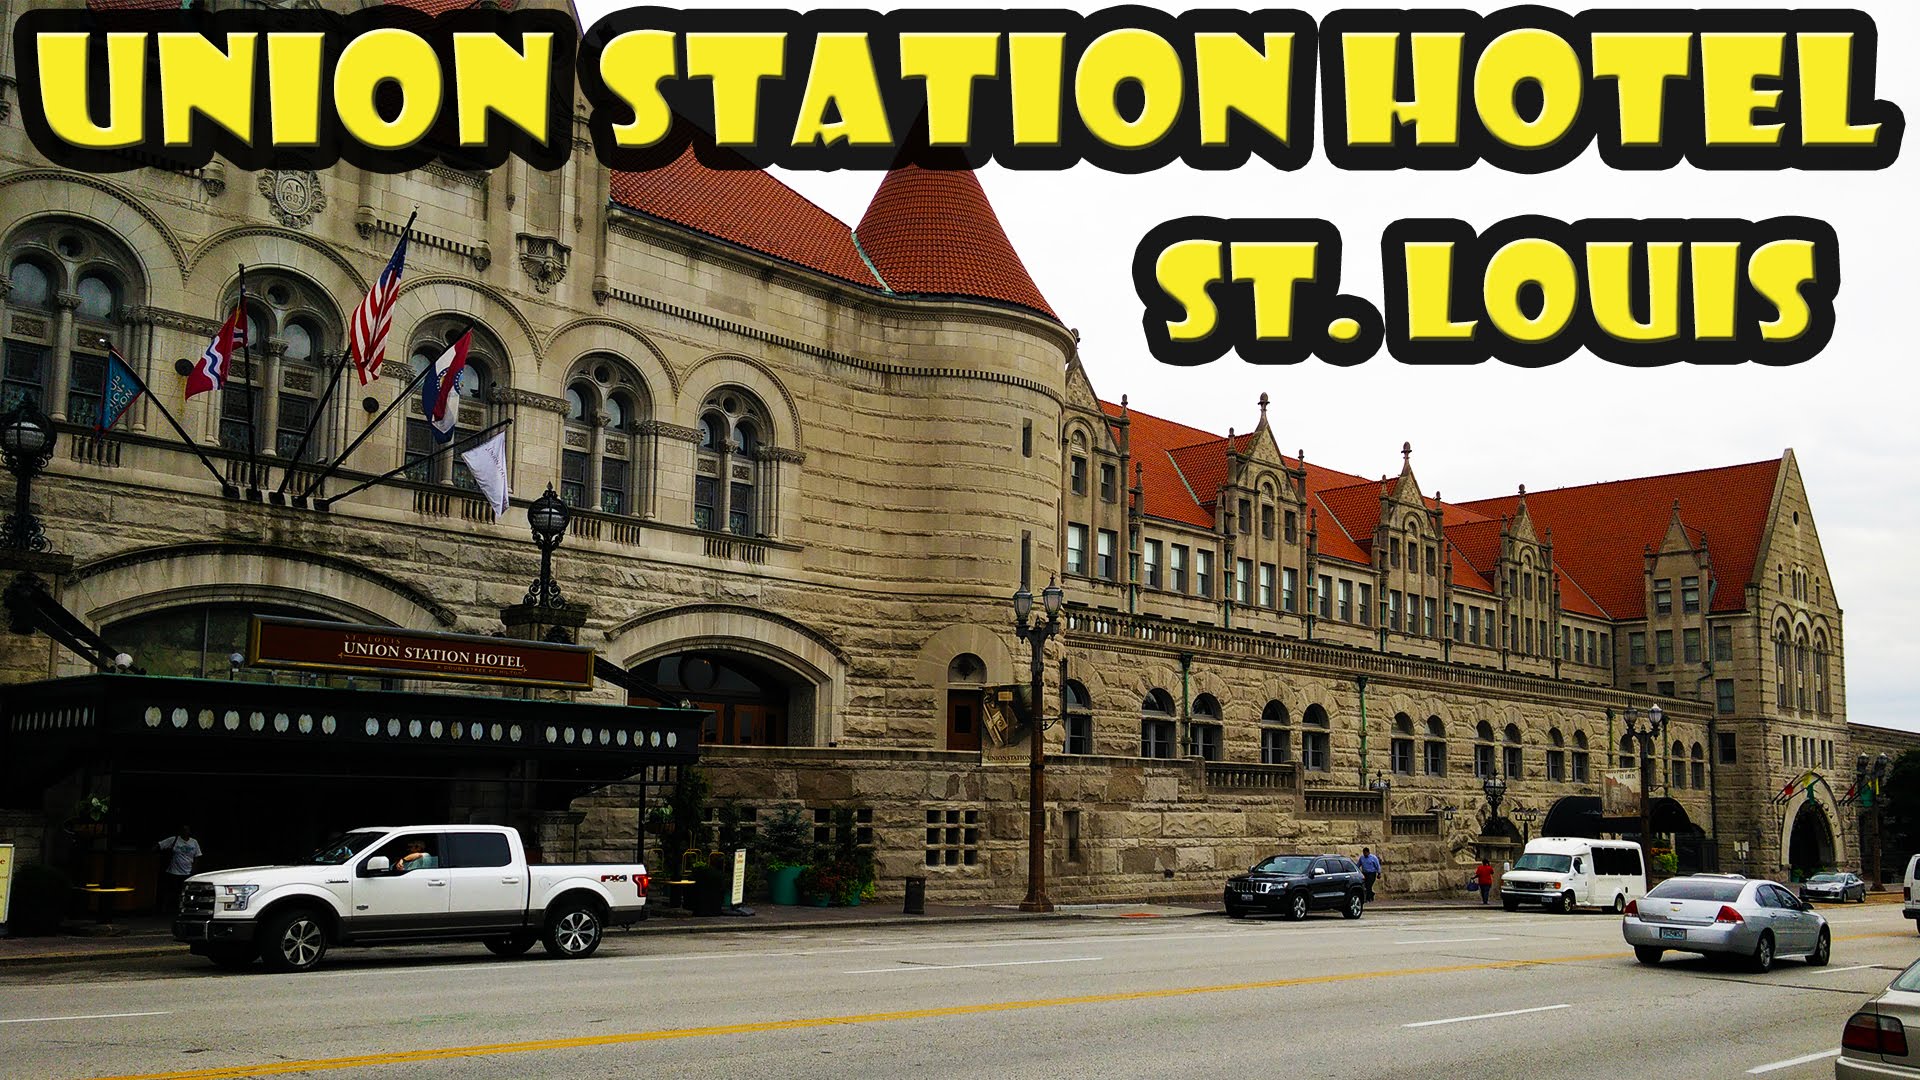 St. Louis Union Station Doubletree Hotel Review - Yellow Productions Travel Videos